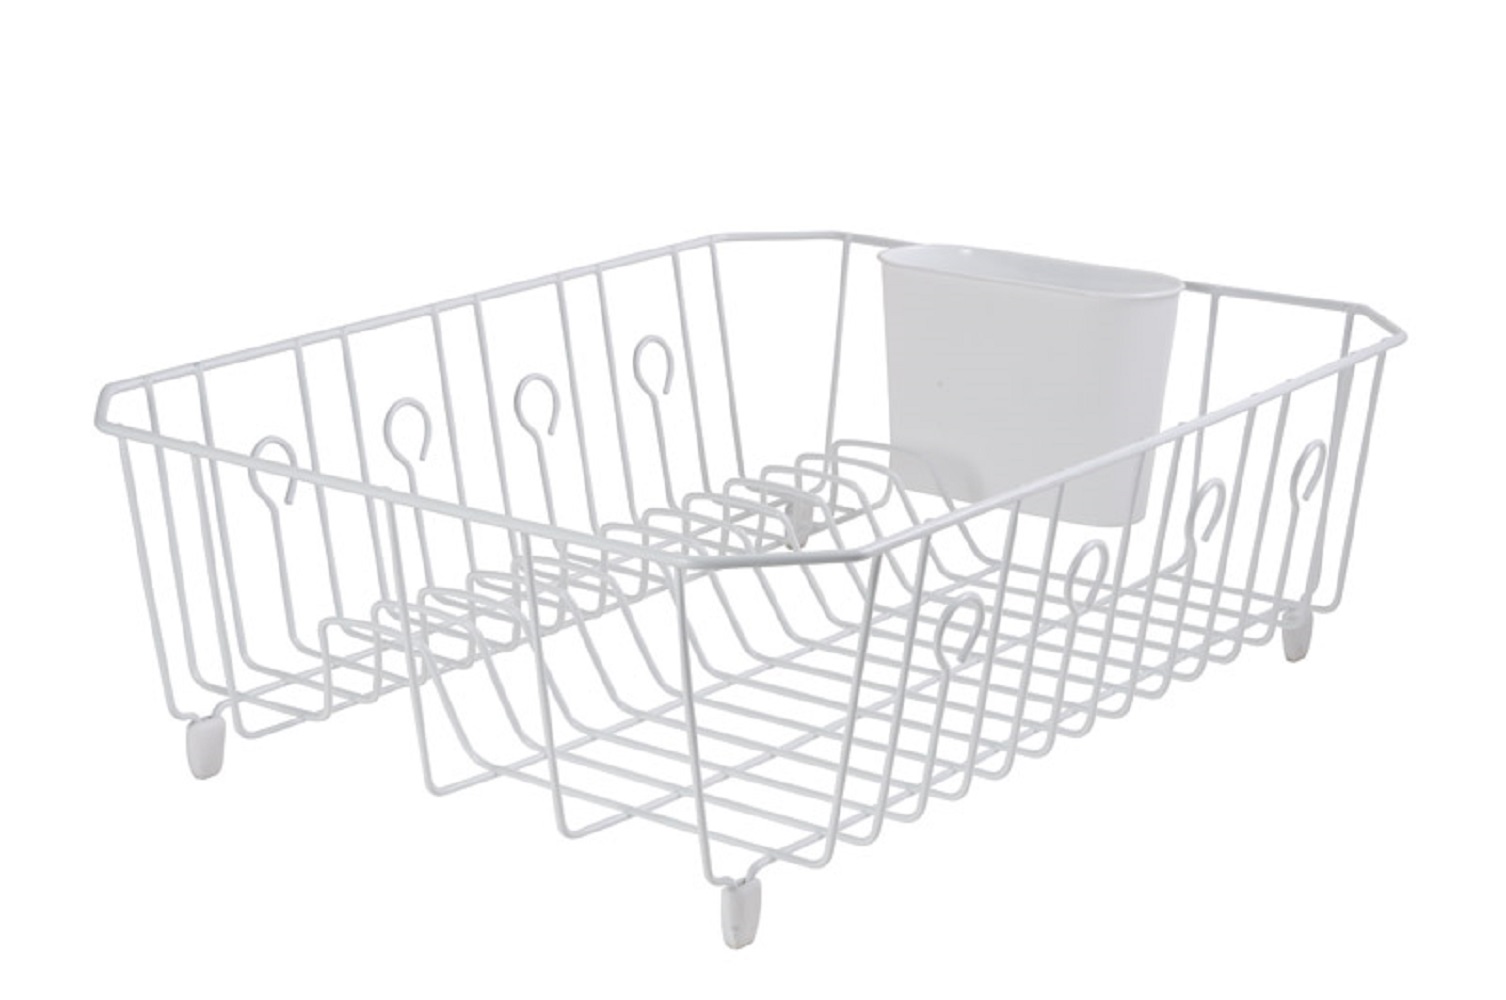 Rubbermaid Large White Dish Drainer - image 1 of 4